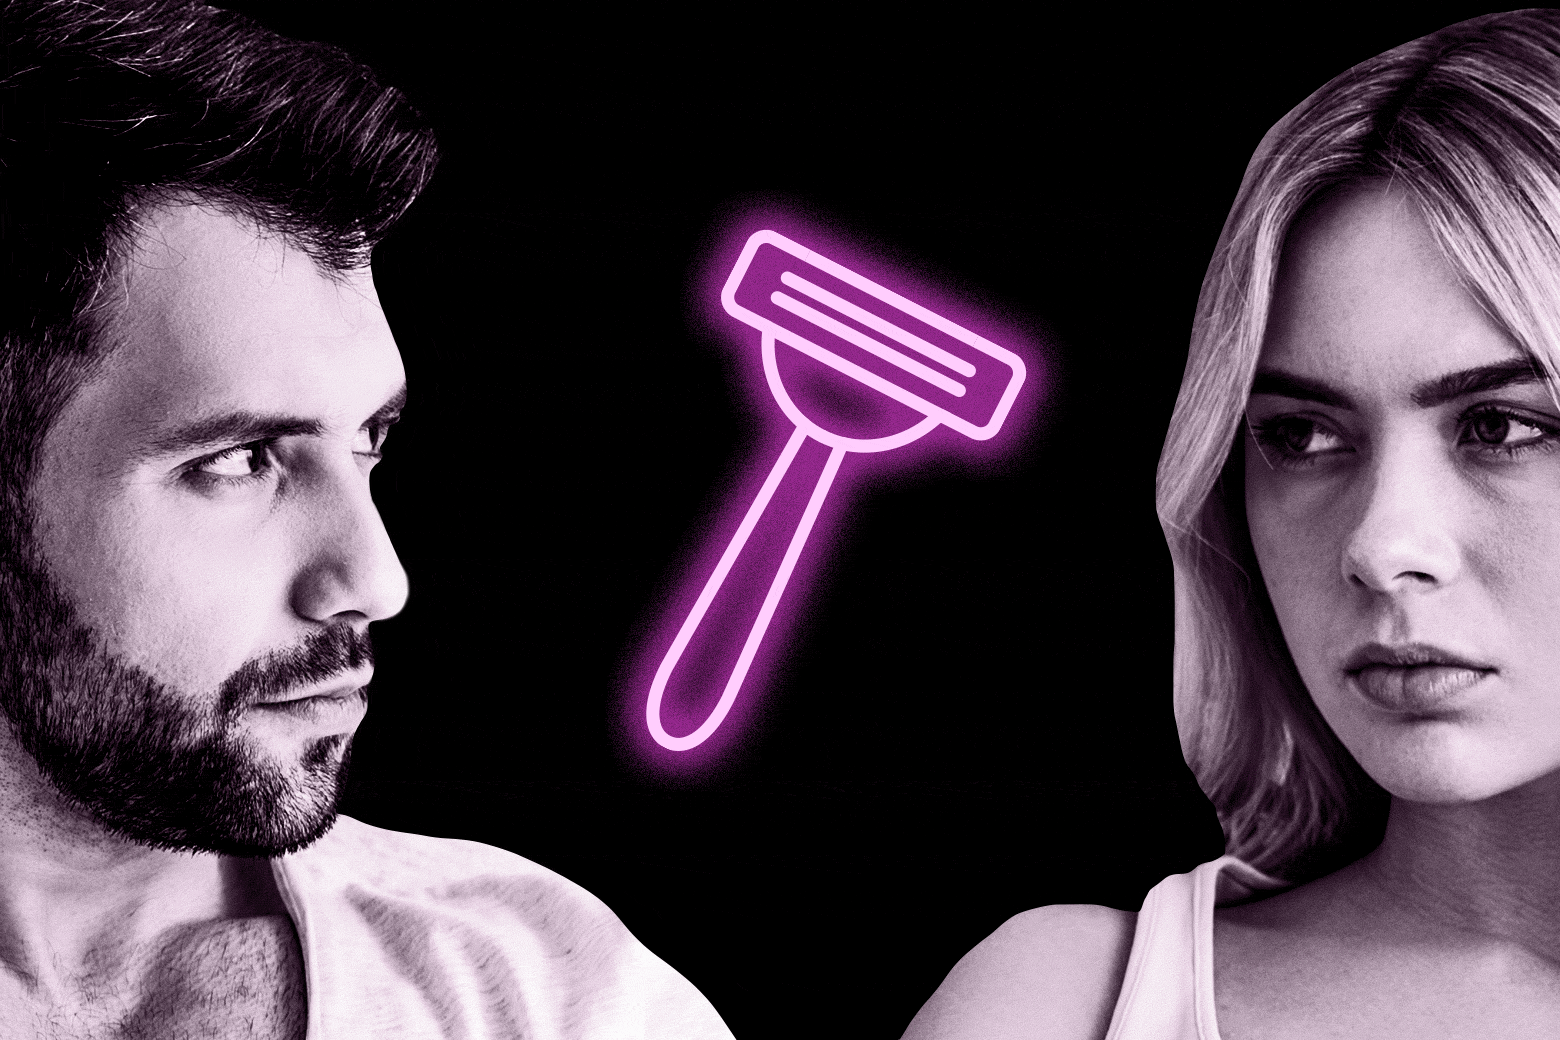 My Girlfriend Stopped Shaving Her Armpits So I Want To Stop Shaving My Pubic Hair Fair